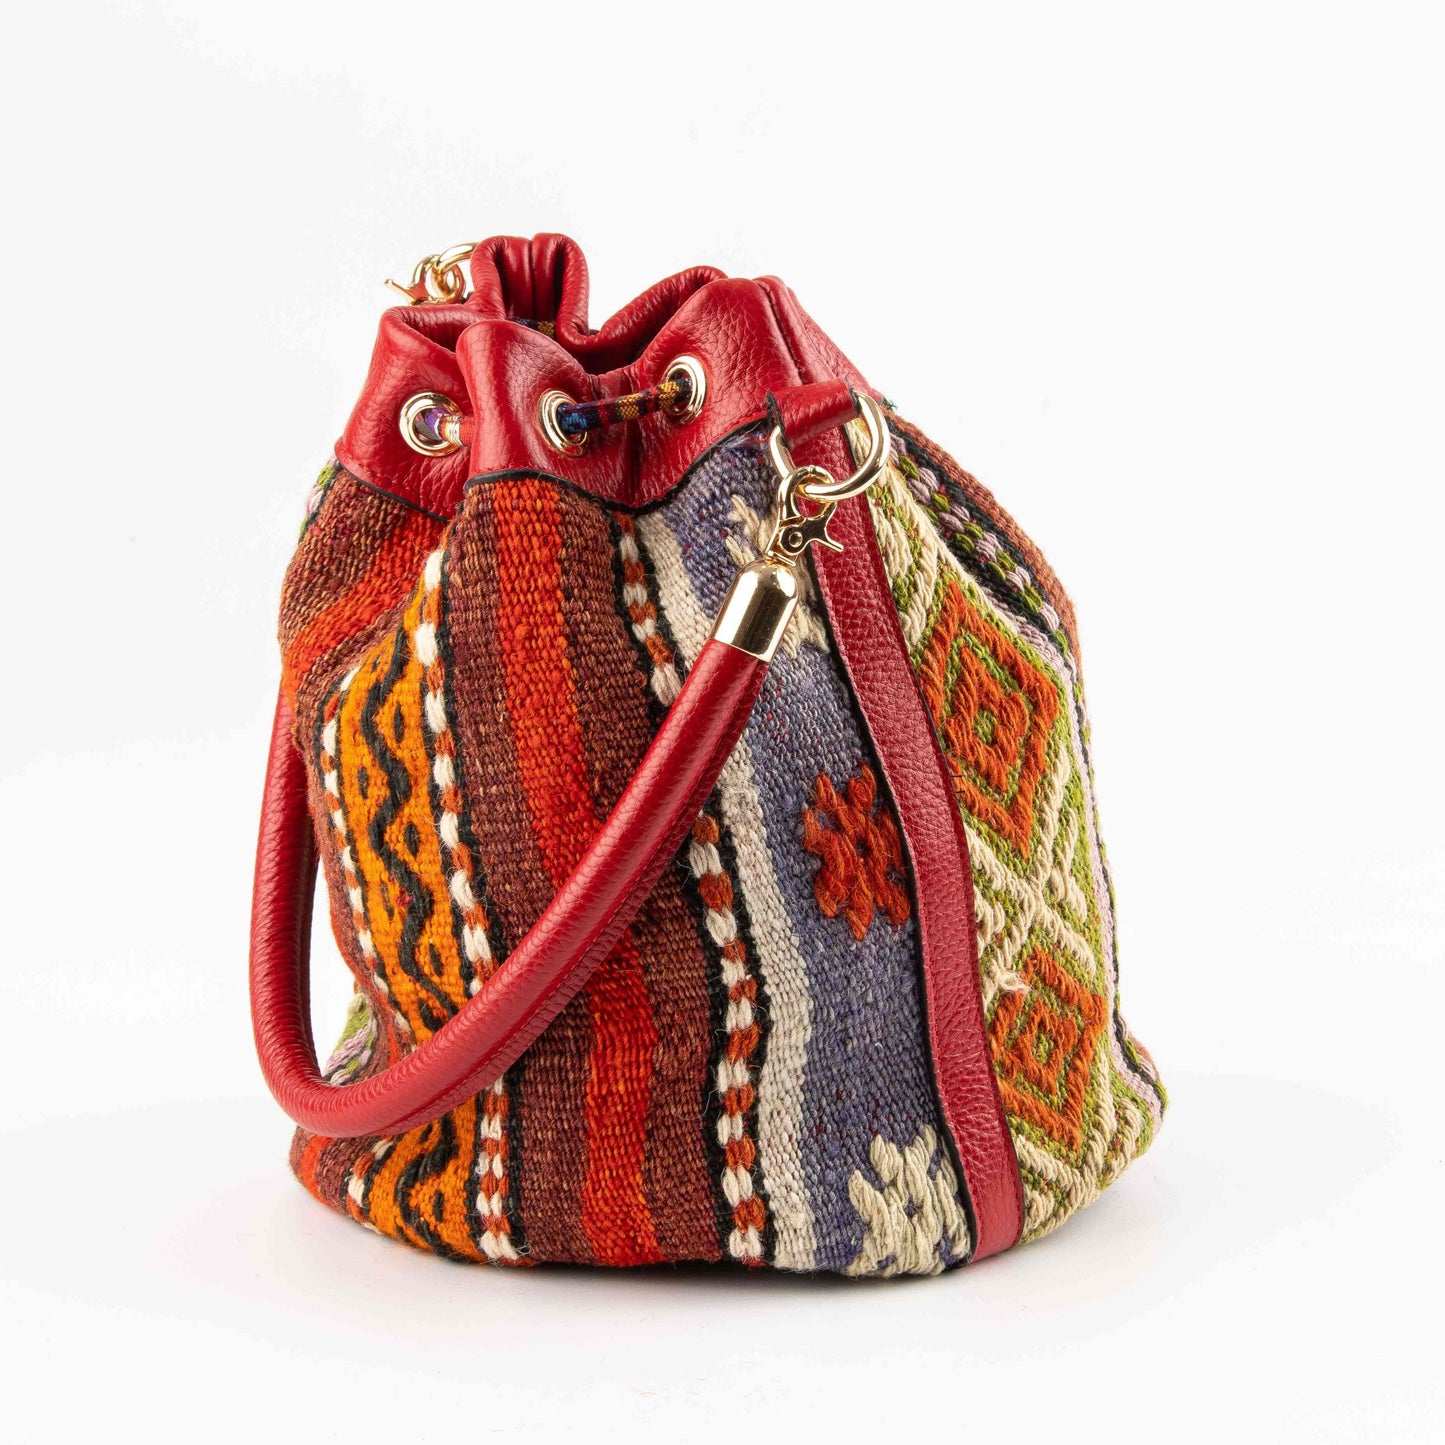 Handmade Kilim Real Leather Unique Drawstring Bag Leather Strap Zipper Closure Lined